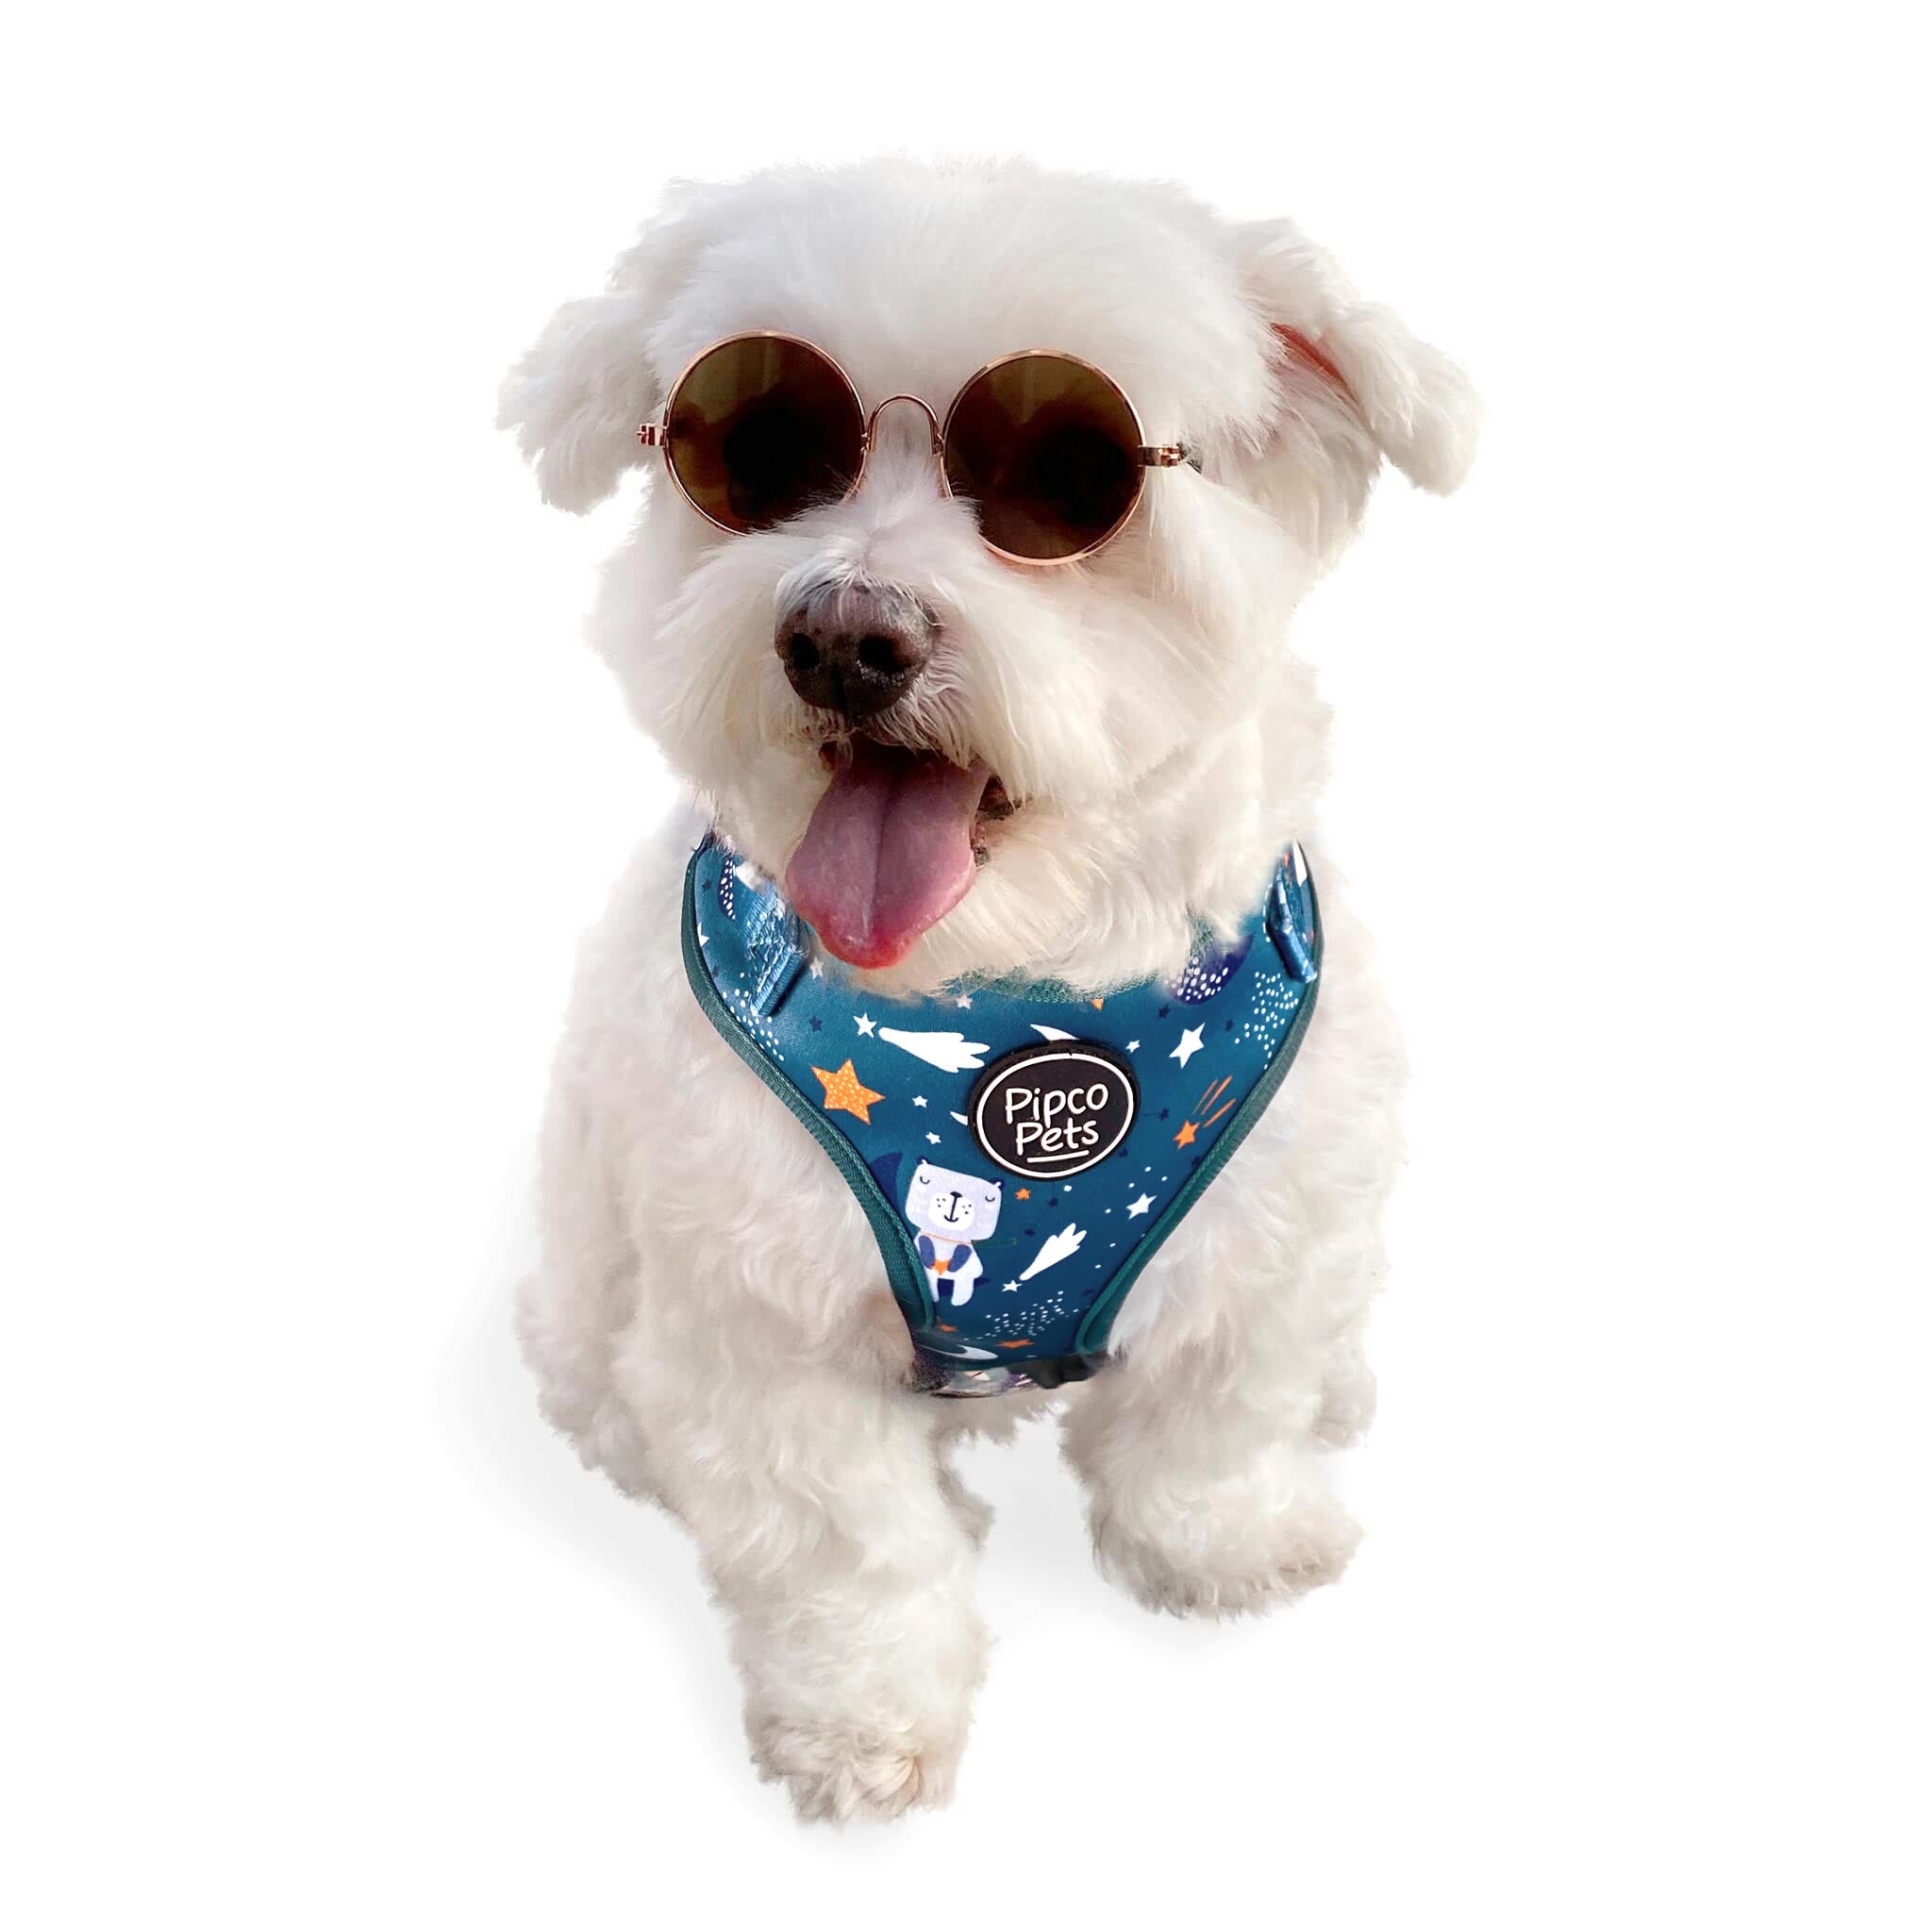 Cute dog wearing sunglasses and Pipco Pets adjustable harness with Starry Night outer space and stars print pattern in teal